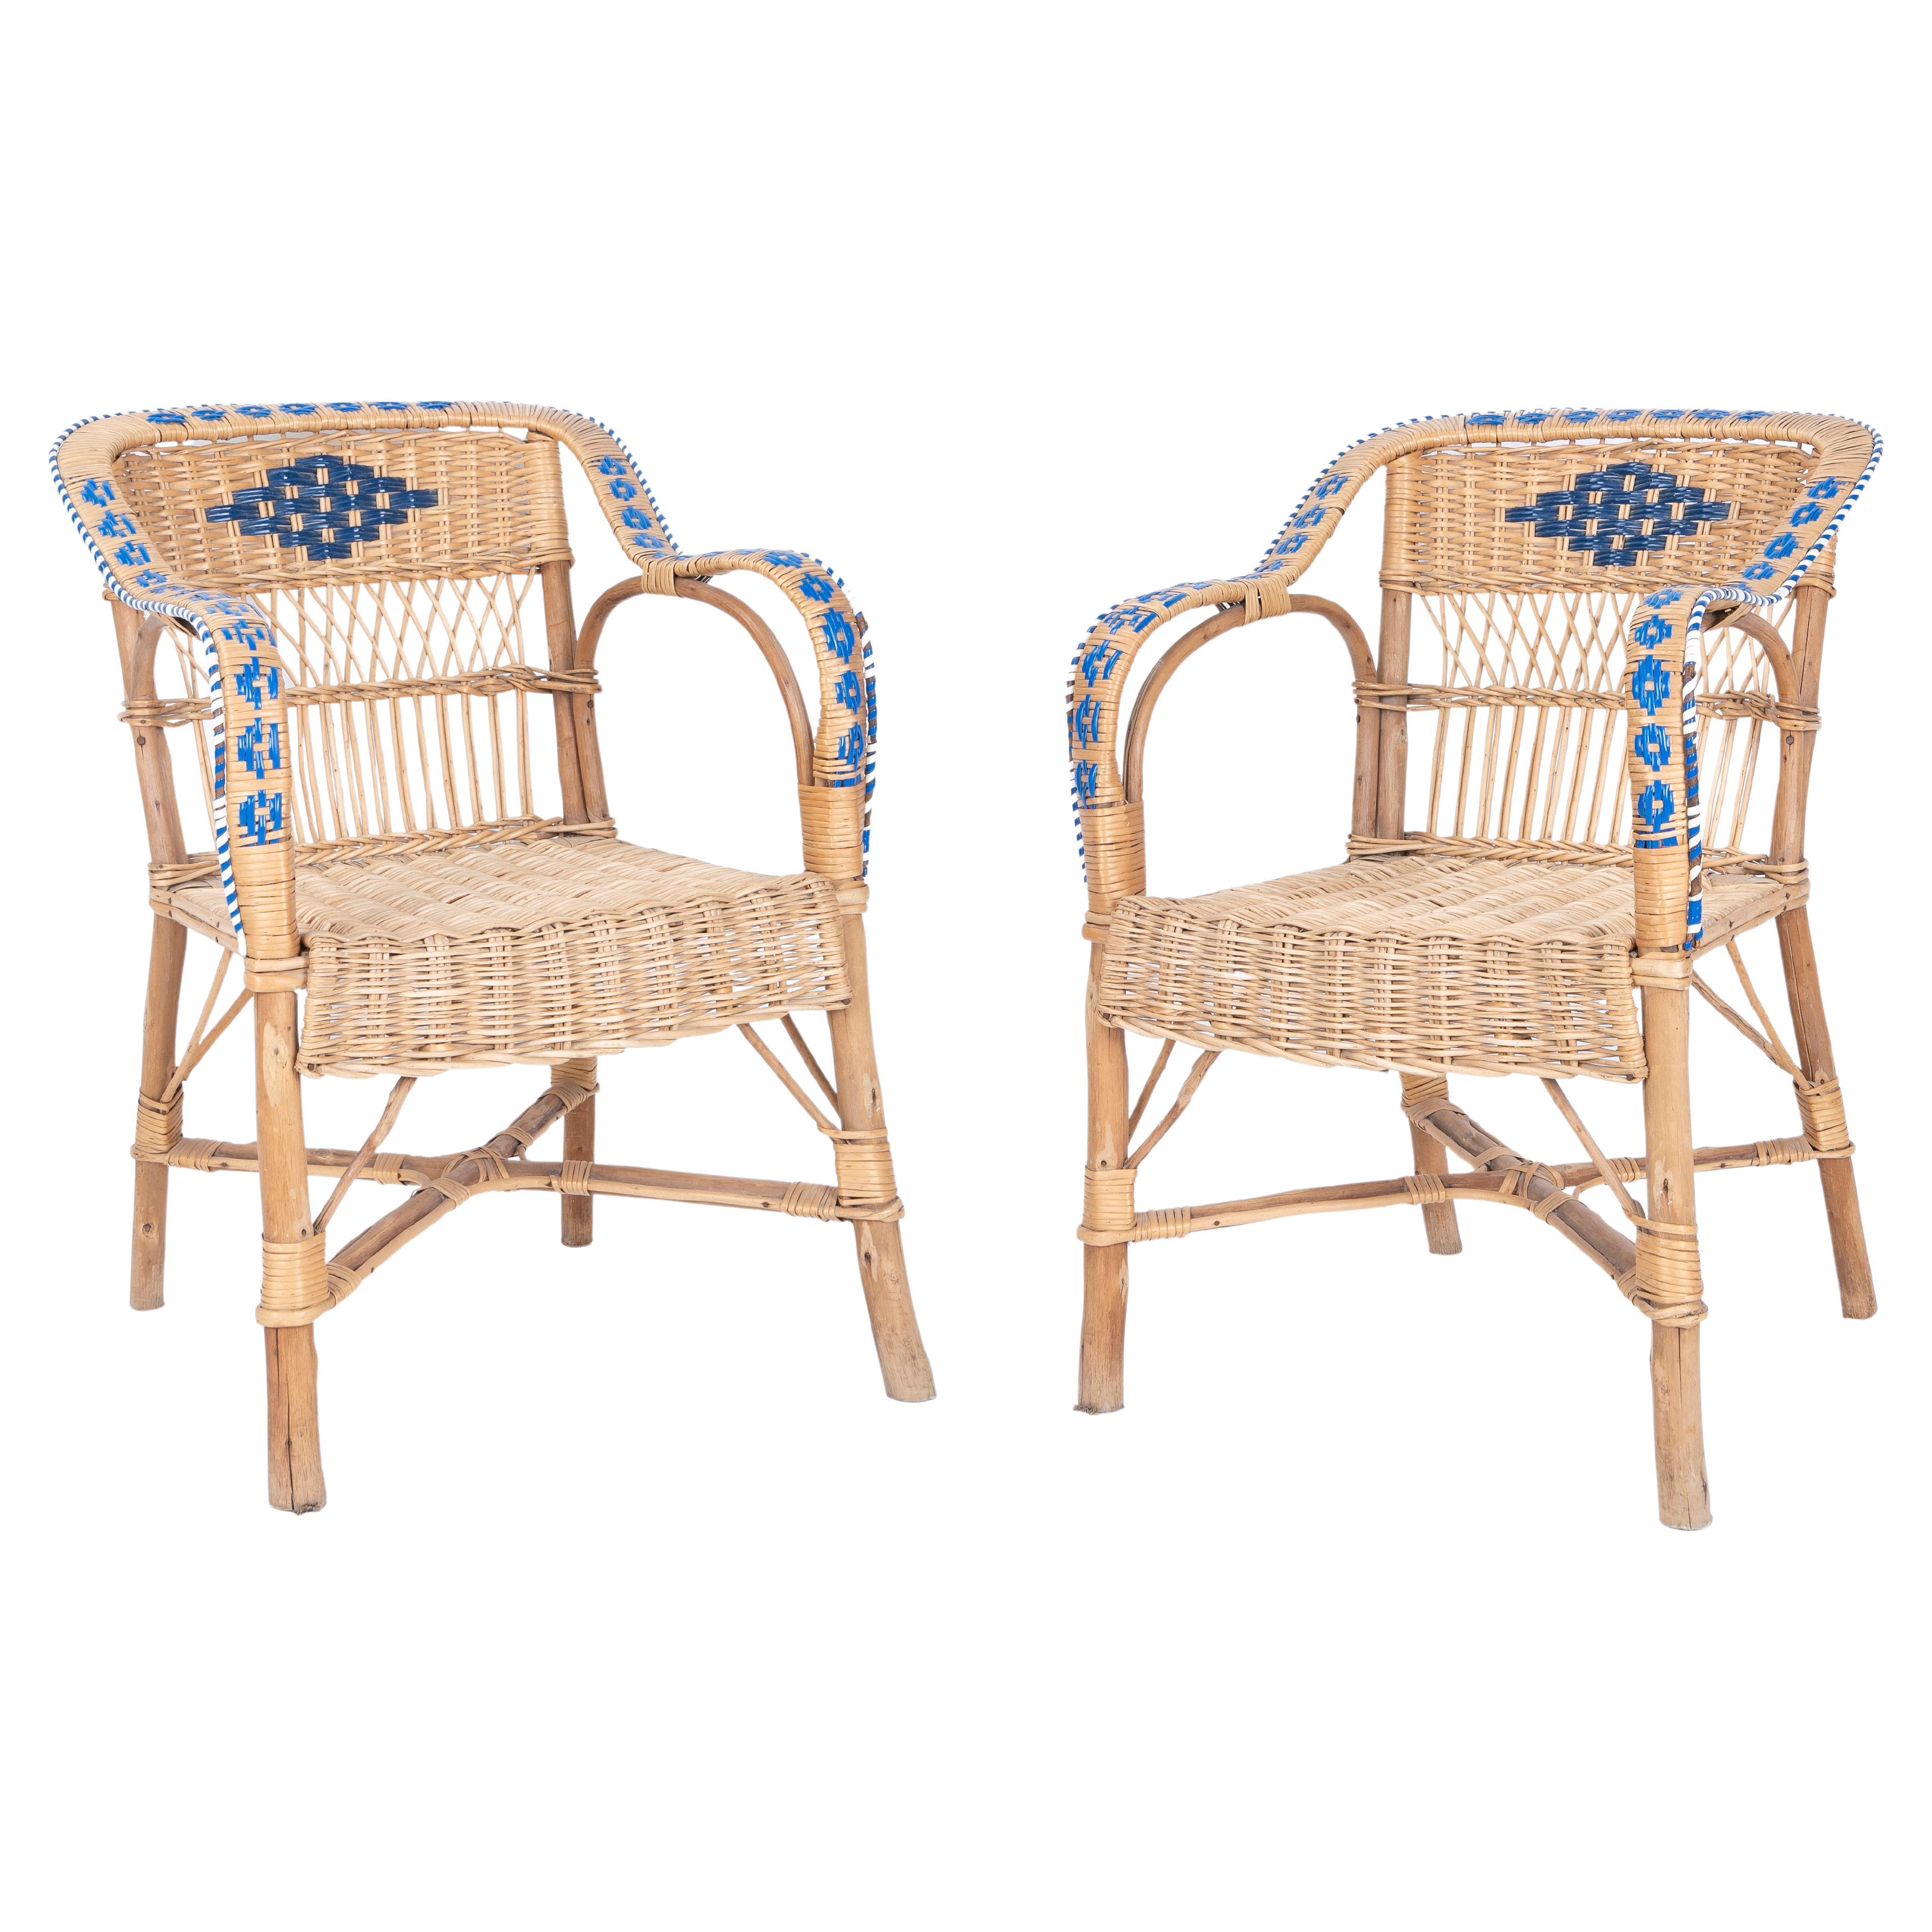 1970s Pair of Handmade Wooden and Wicker Chairs 